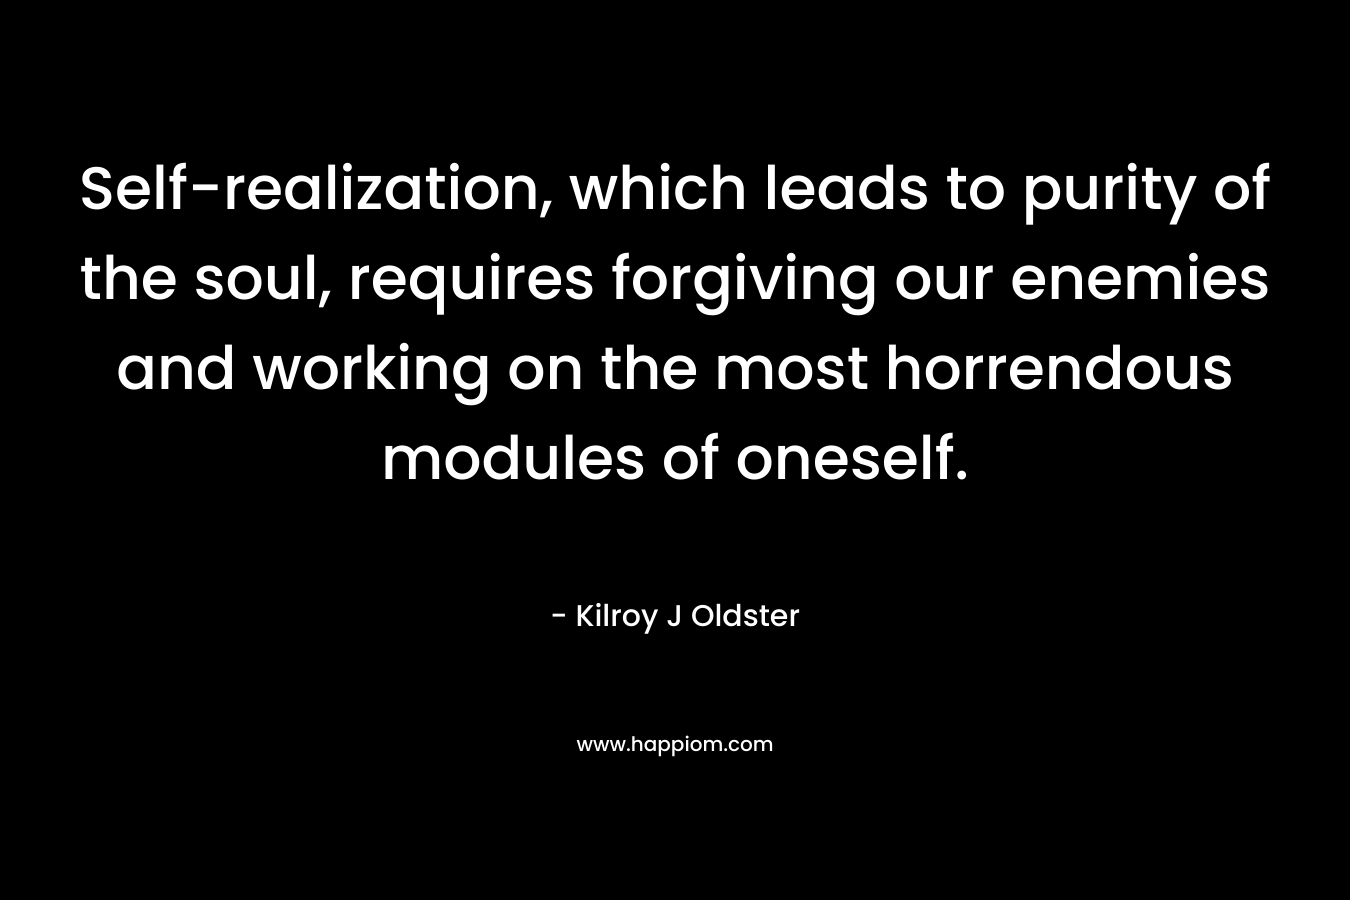 Self-realization, which leads to purity of the soul, requires forgiving our enemies and working on the most horrendous modules of oneself. – Kilroy J Oldster